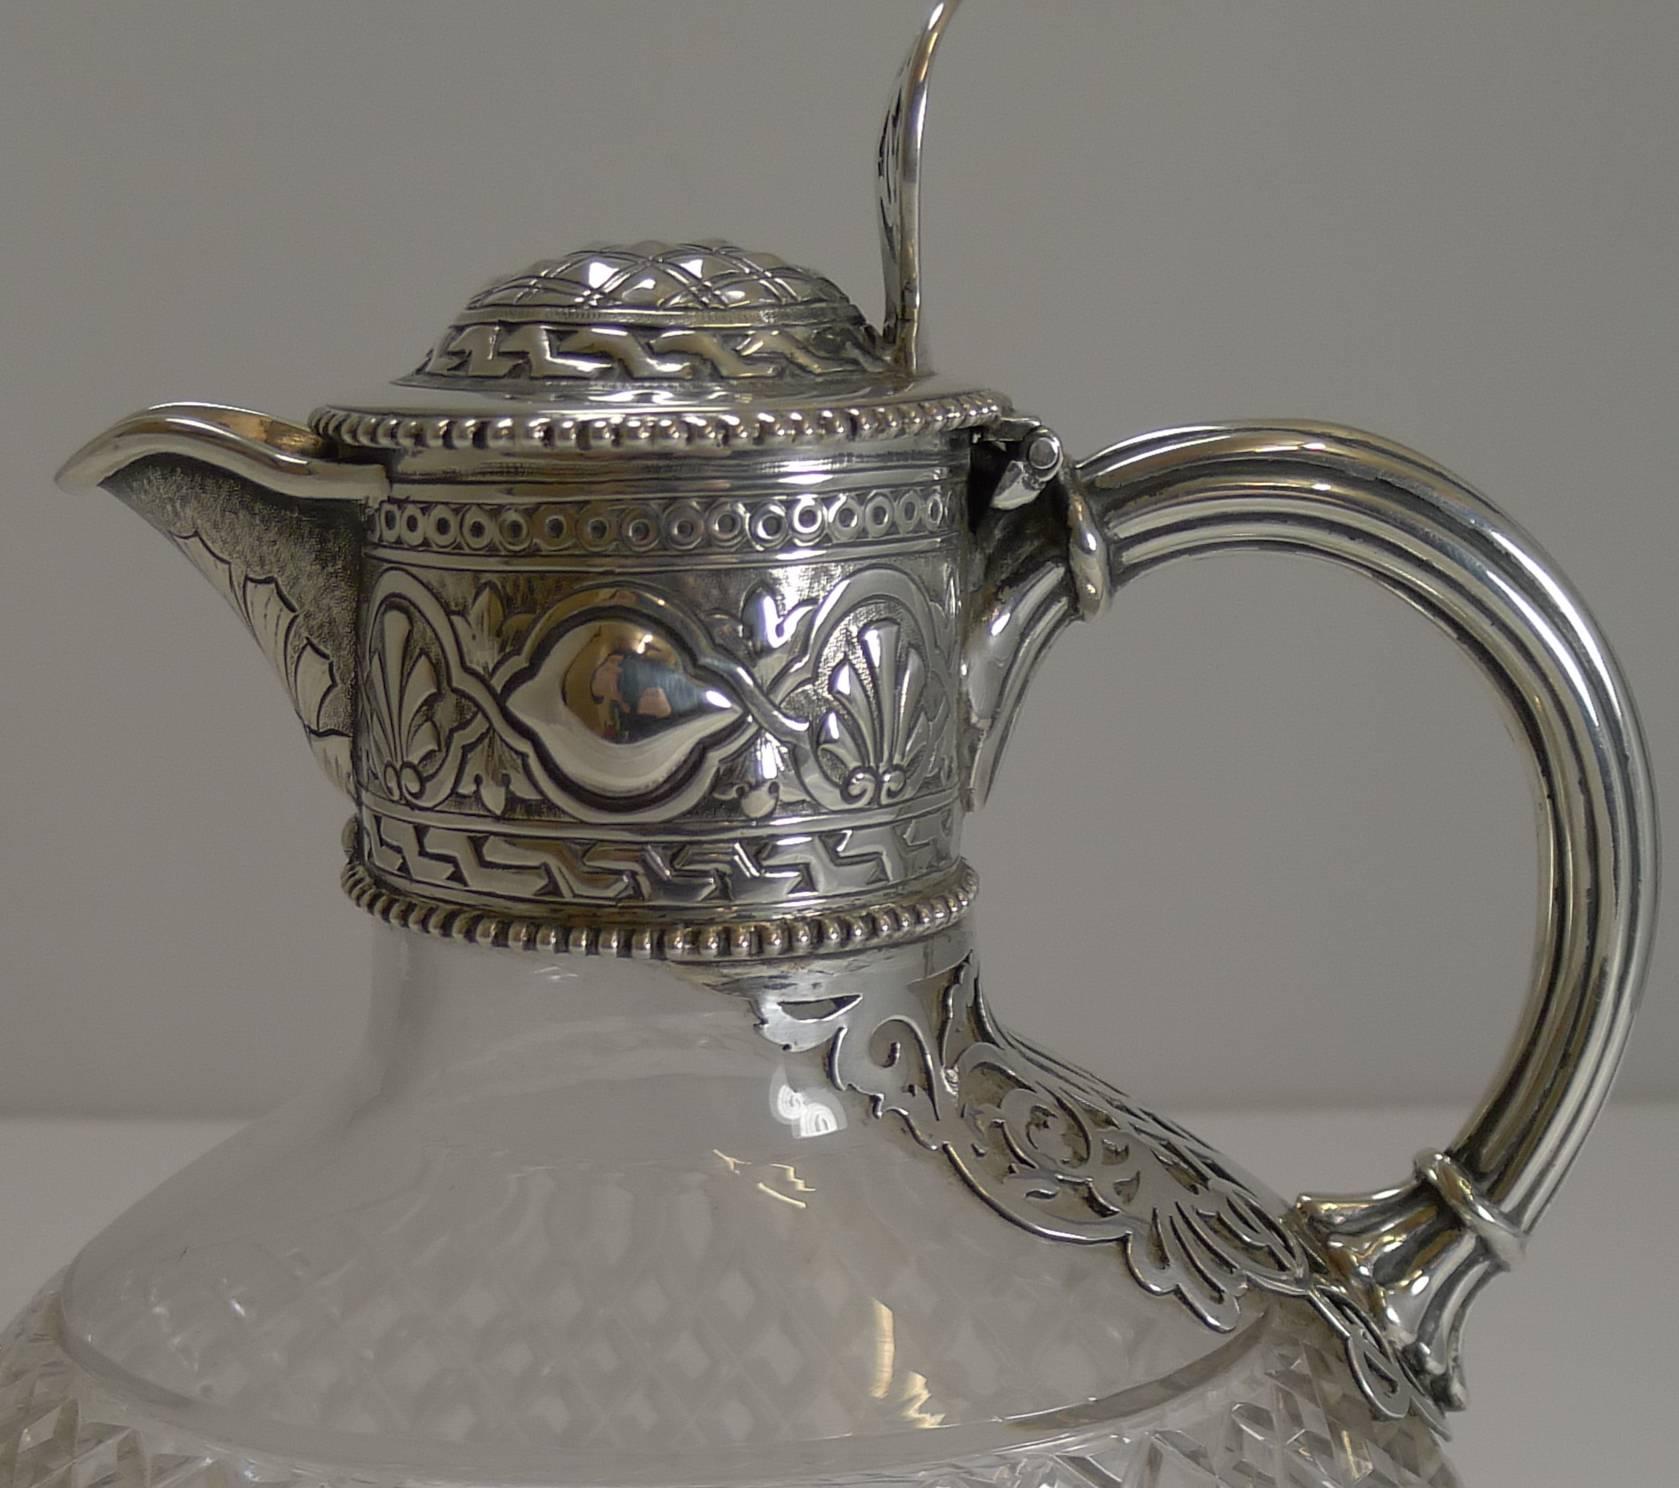 A magnificent and unusual Victorian claret or wine jug or pitcher, made from English cut crystal, deeply cut and without damage.

The fittings are made from English sterling silver including the fabulous pierced or reticulated decoration running